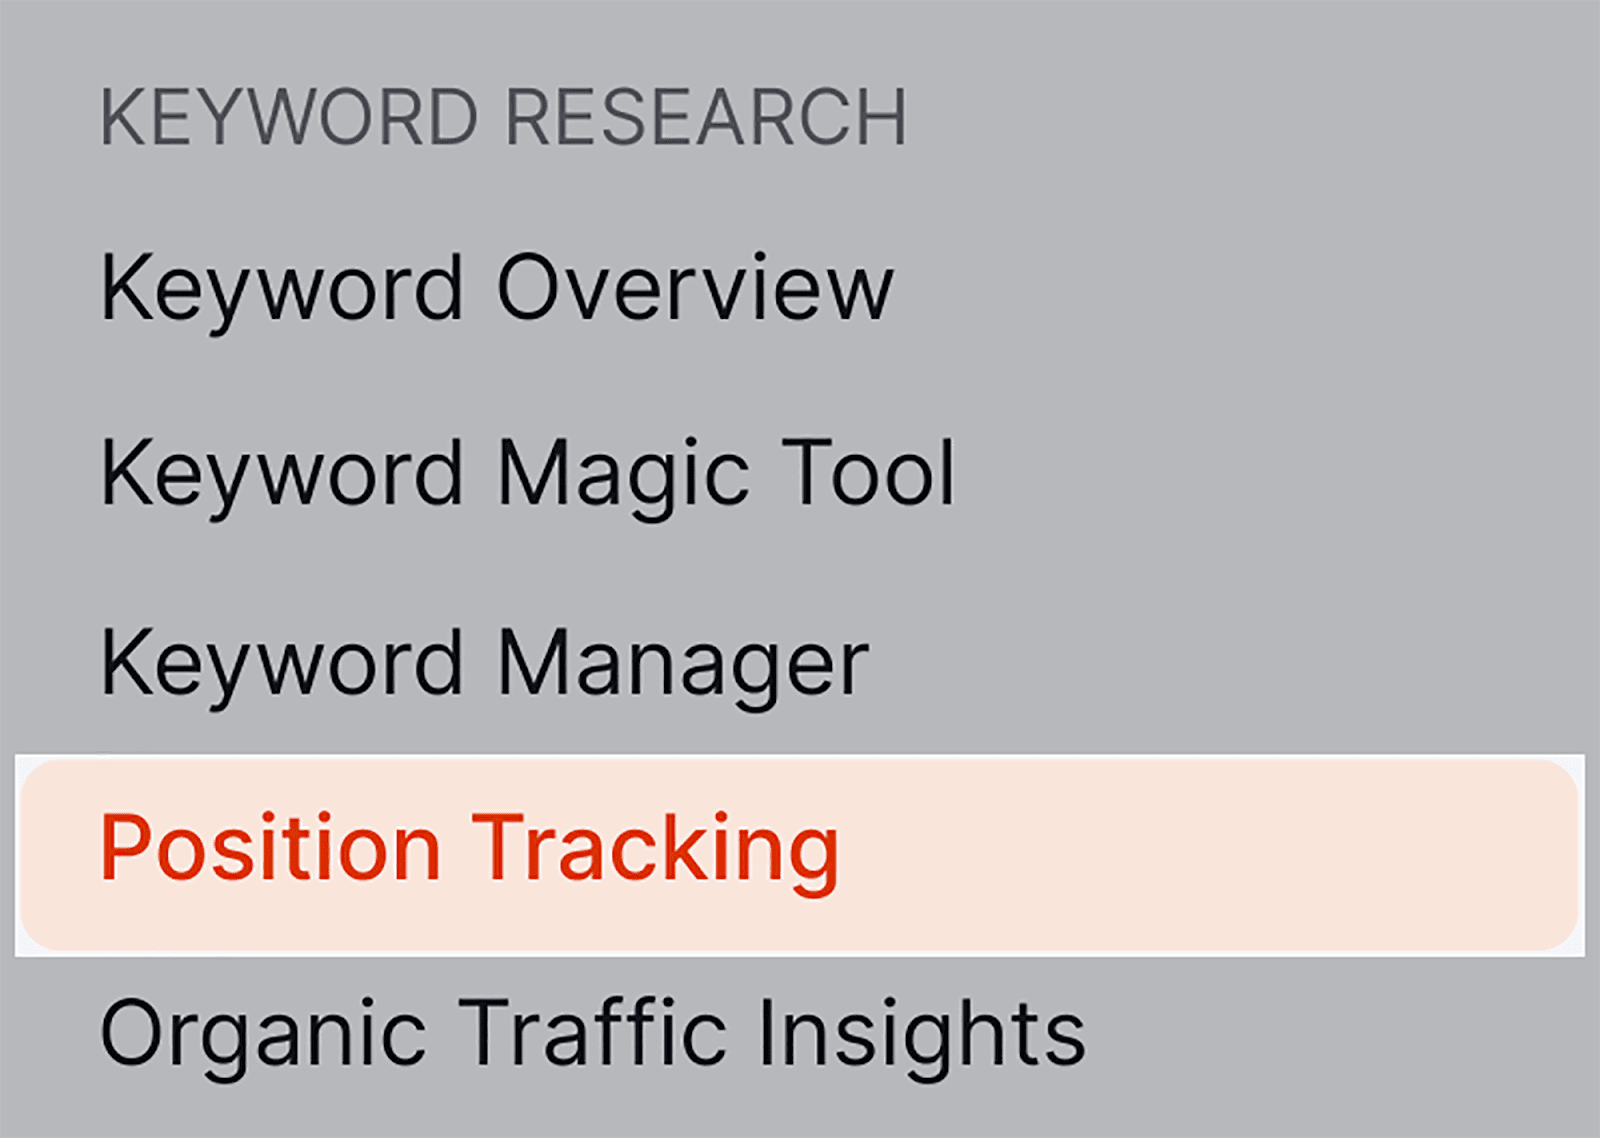 Position Tracking for your keywords